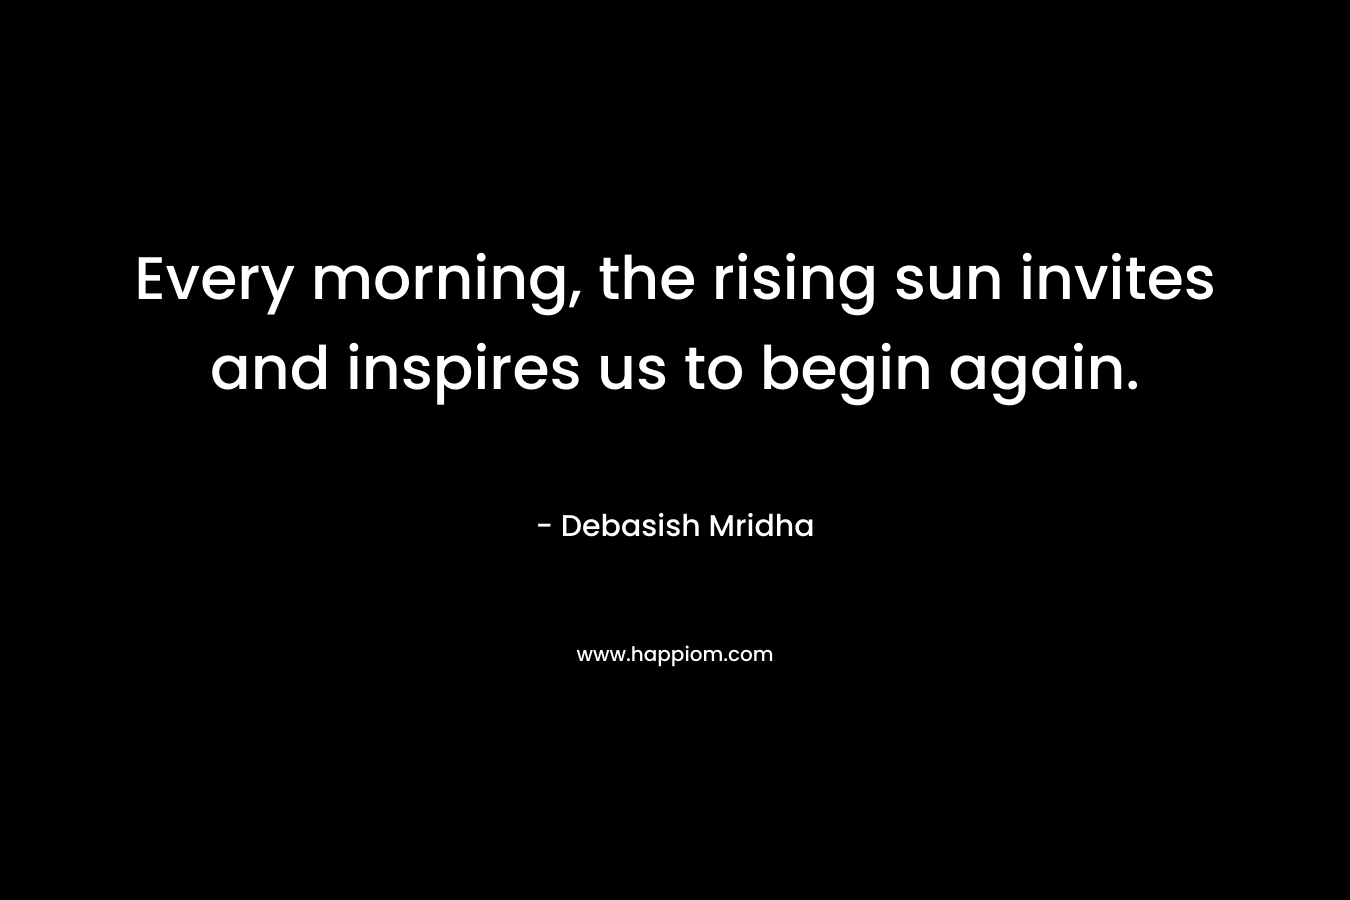 Every morning, the rising sun invites and inspires us to begin again.